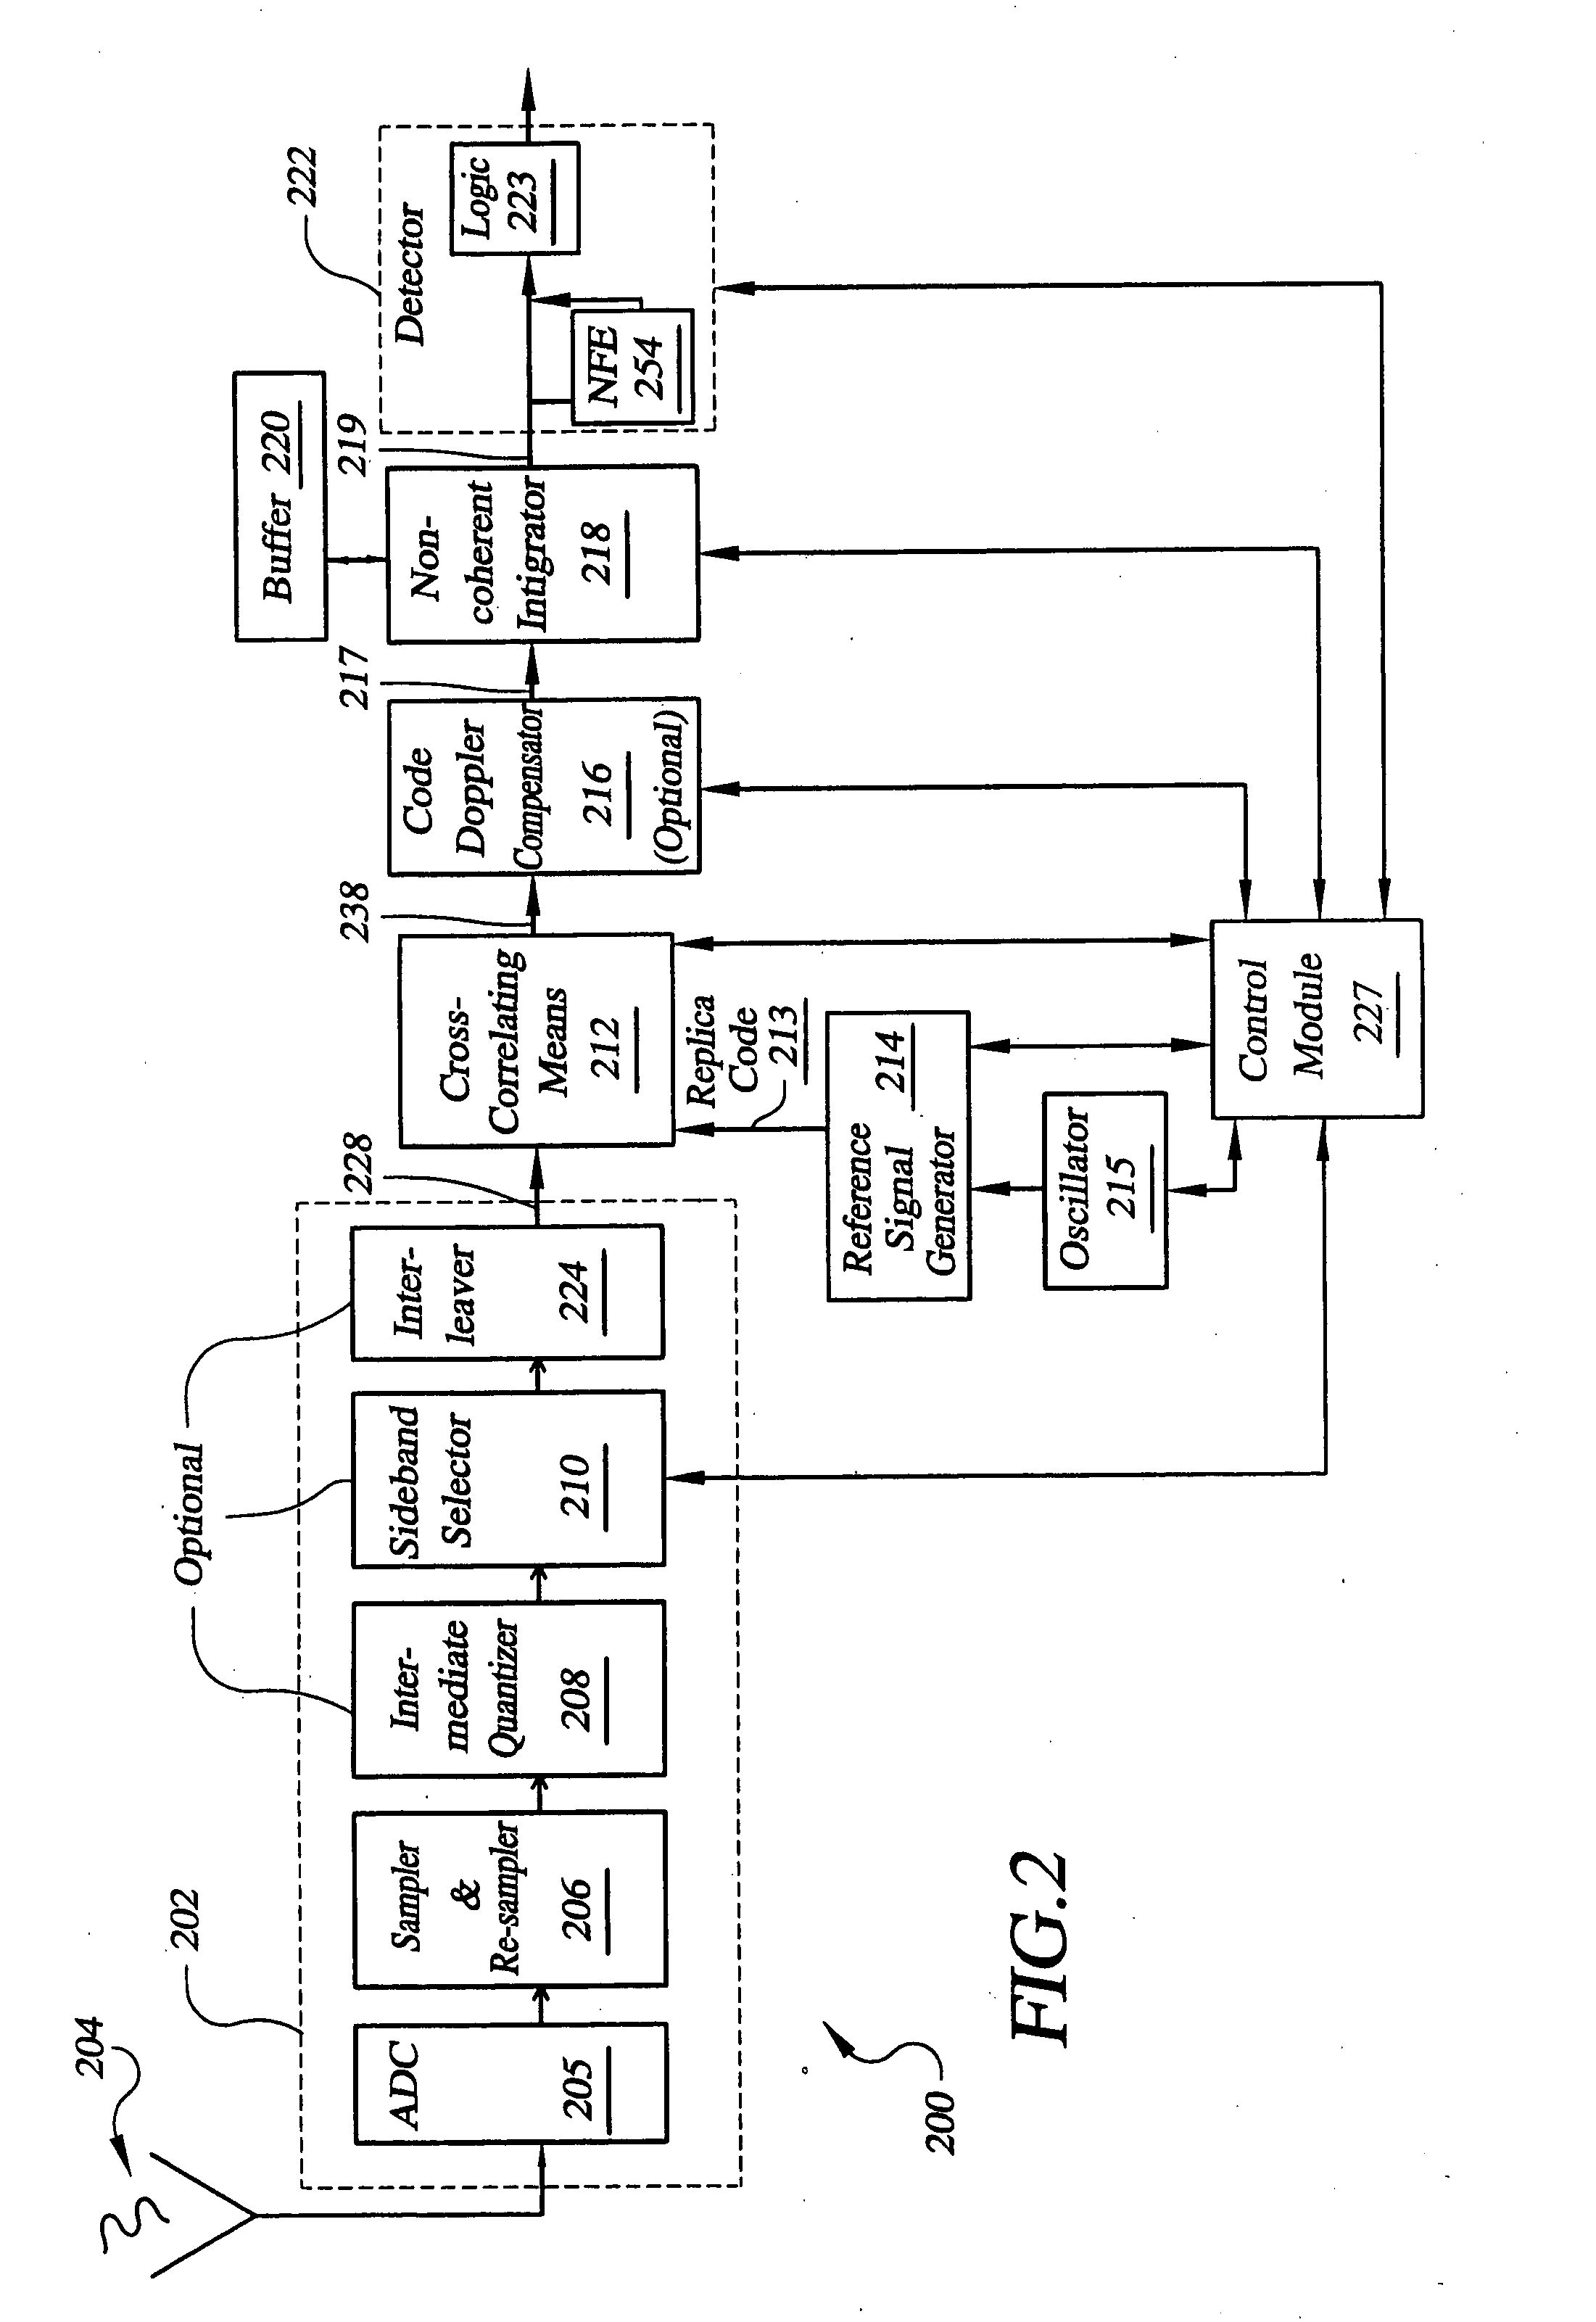 System for direct acquisition of received signals